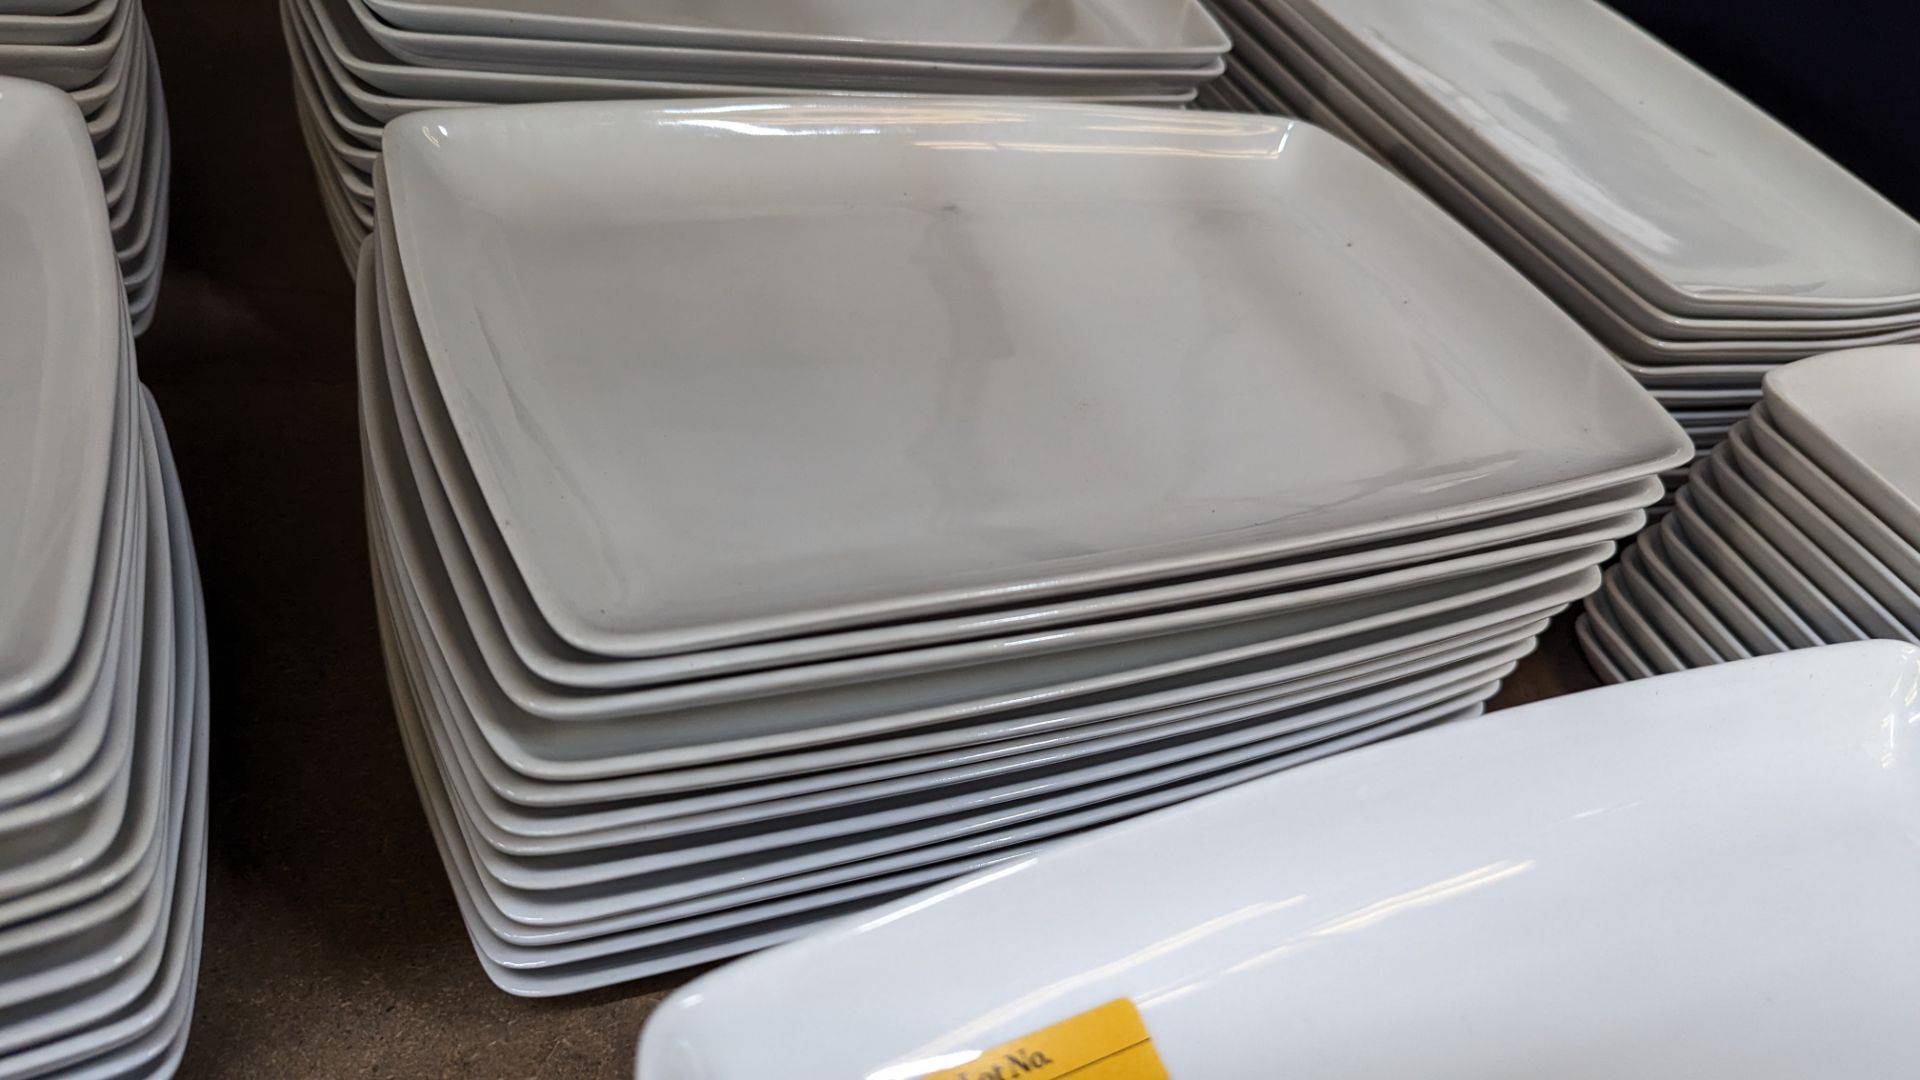 36 off white rectangular plates/small platters each measuring approximately 325mm x 210mm - 3 stacks - Image 4 of 6